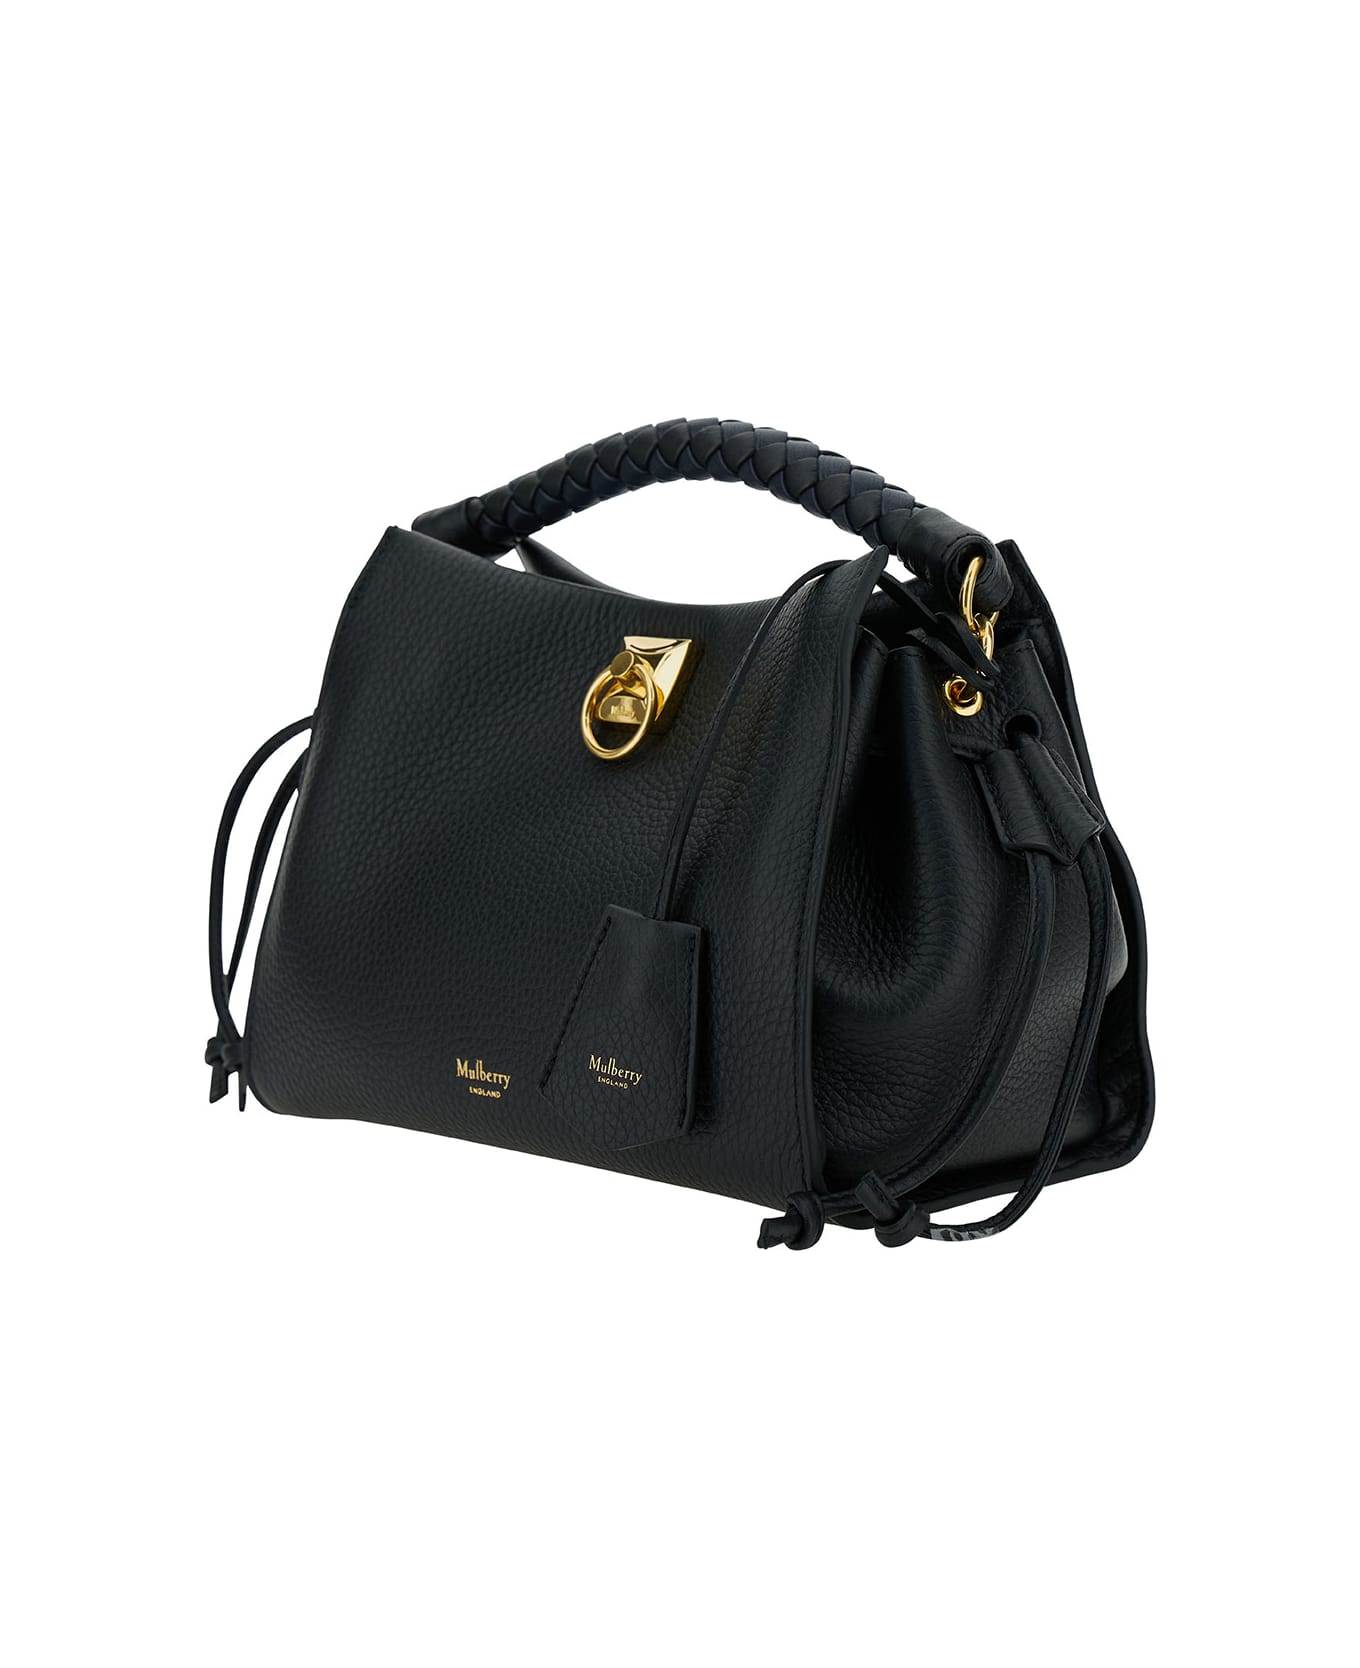 Mulberry 'small Iris' Black Handbag With Logo Detail In Hammered Leather Woman - Black